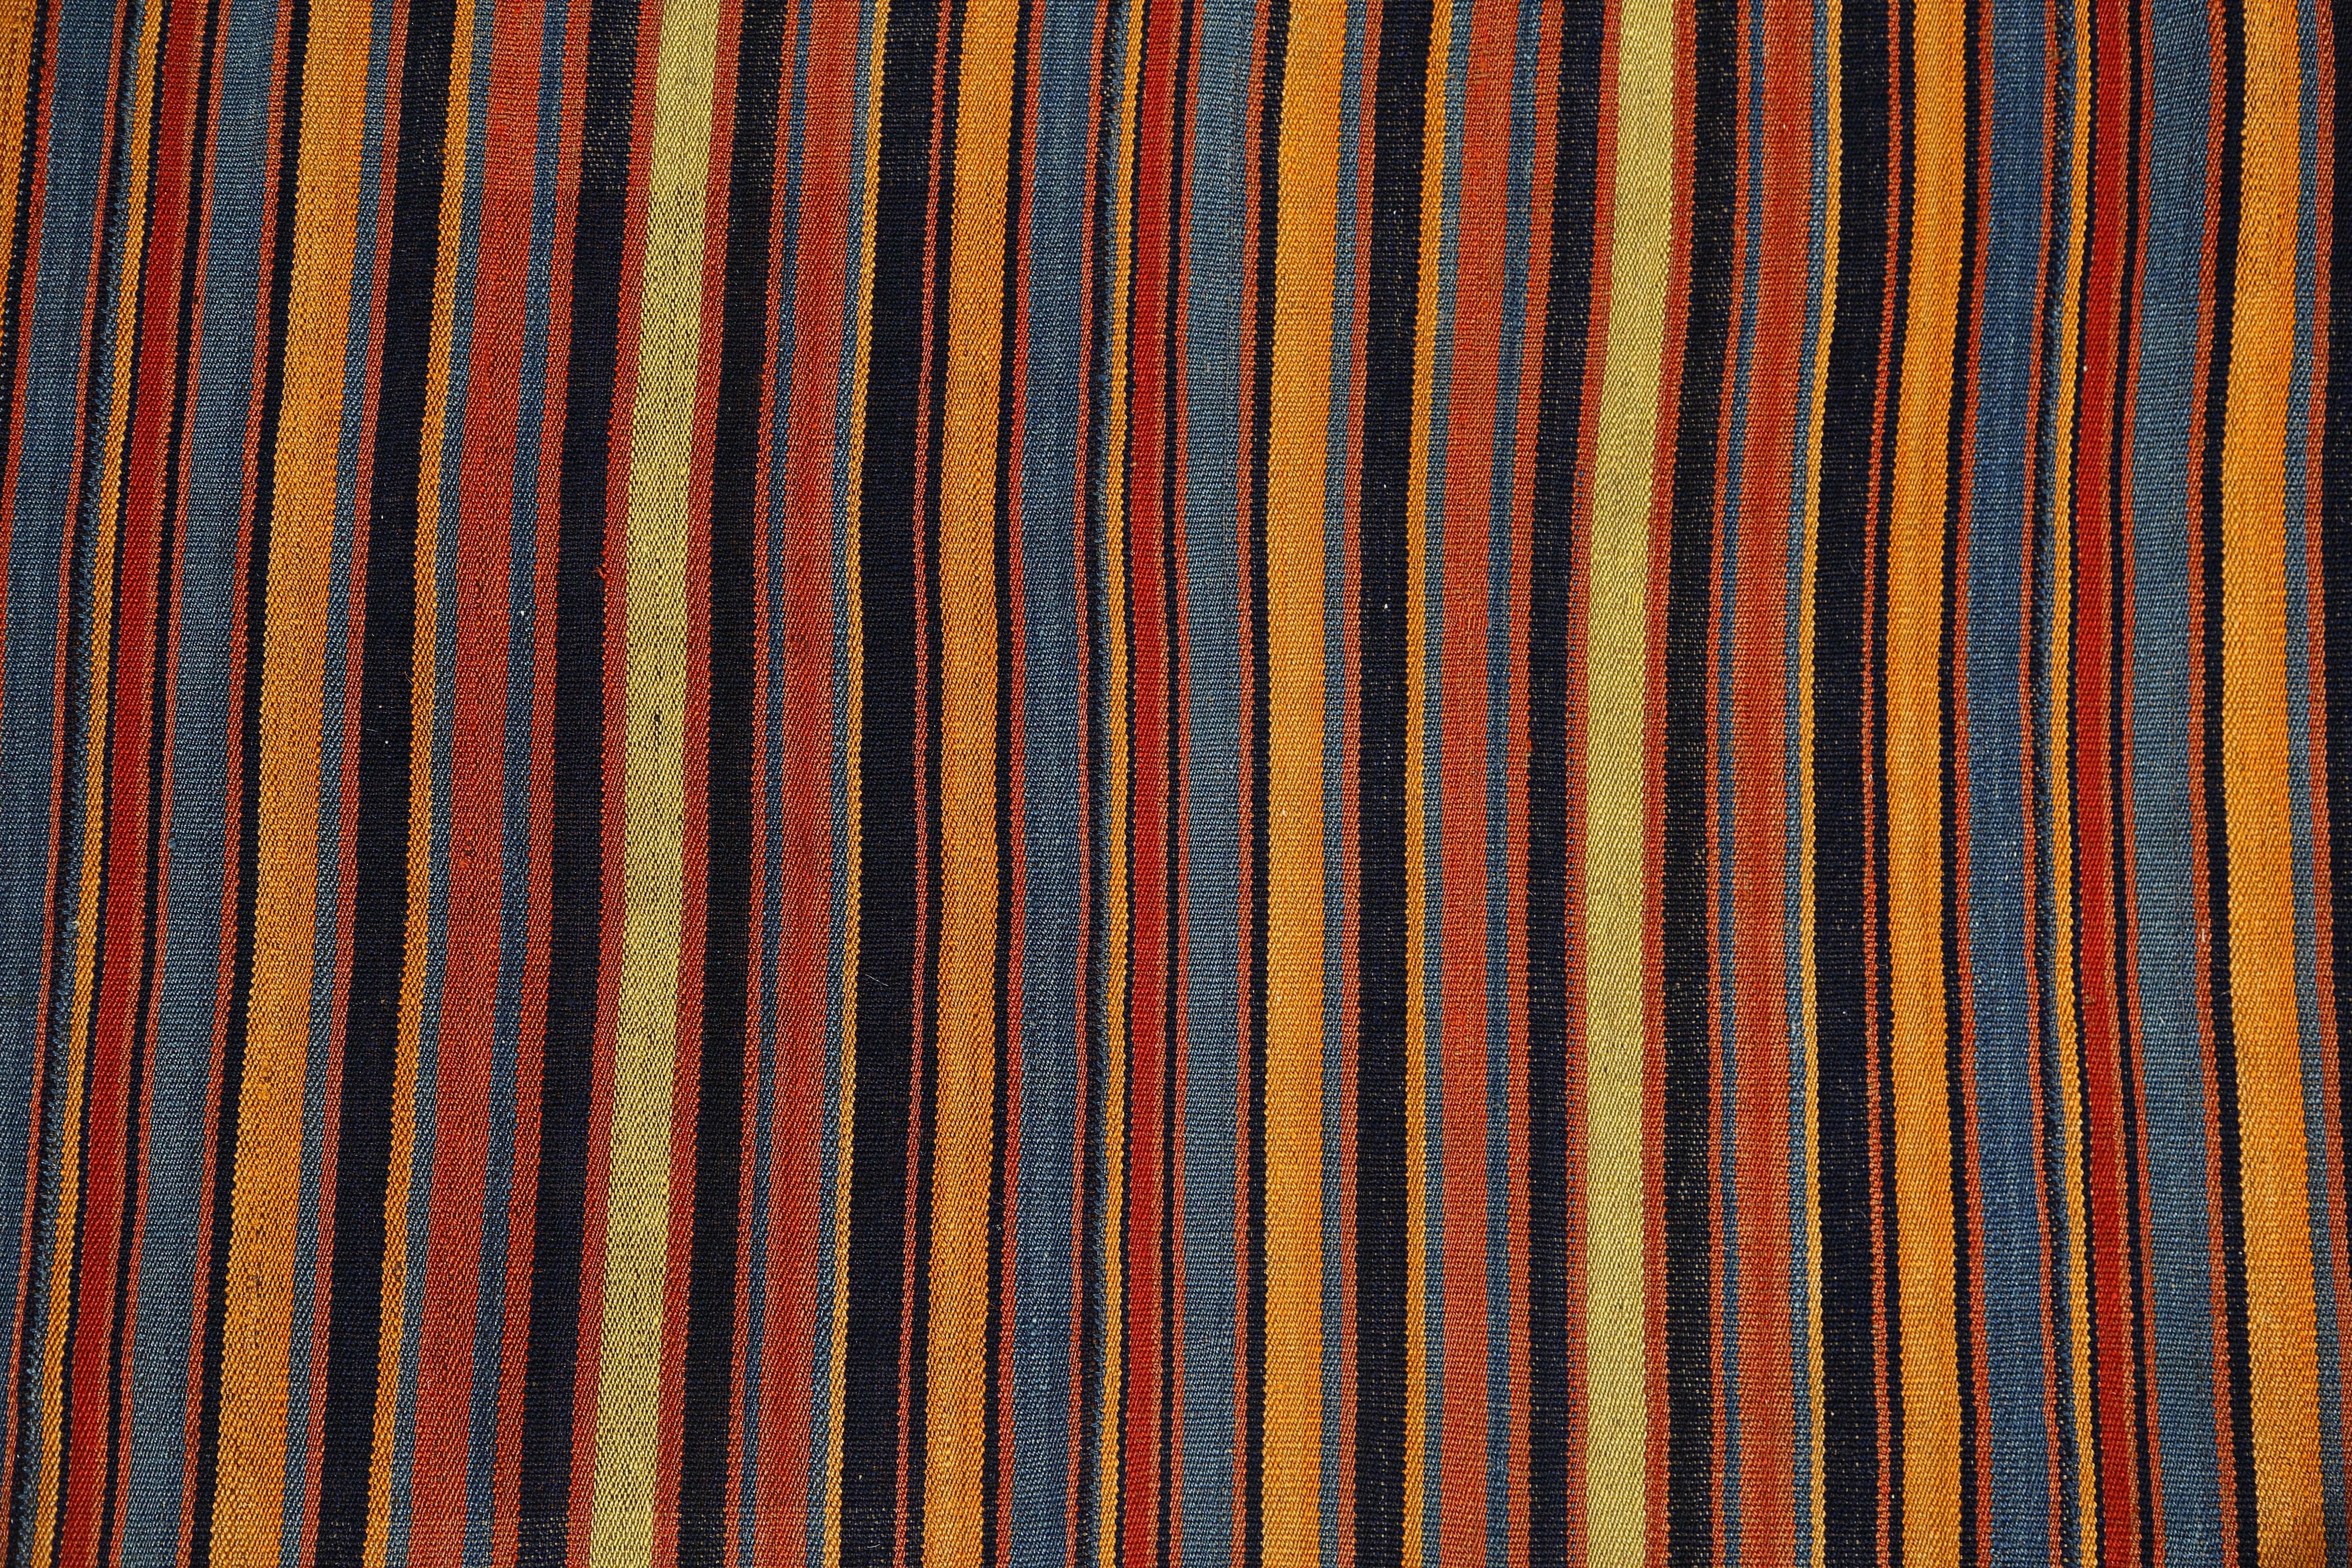 Introducing our handmade Turkish Kilim runner, measuring 3'6'' by 28'7''. This stunning piece features colorful stripes in shades of orange and black, adding a bold touch to any space. Each kilim is carefully crafted by skilled artisans, ensuring a